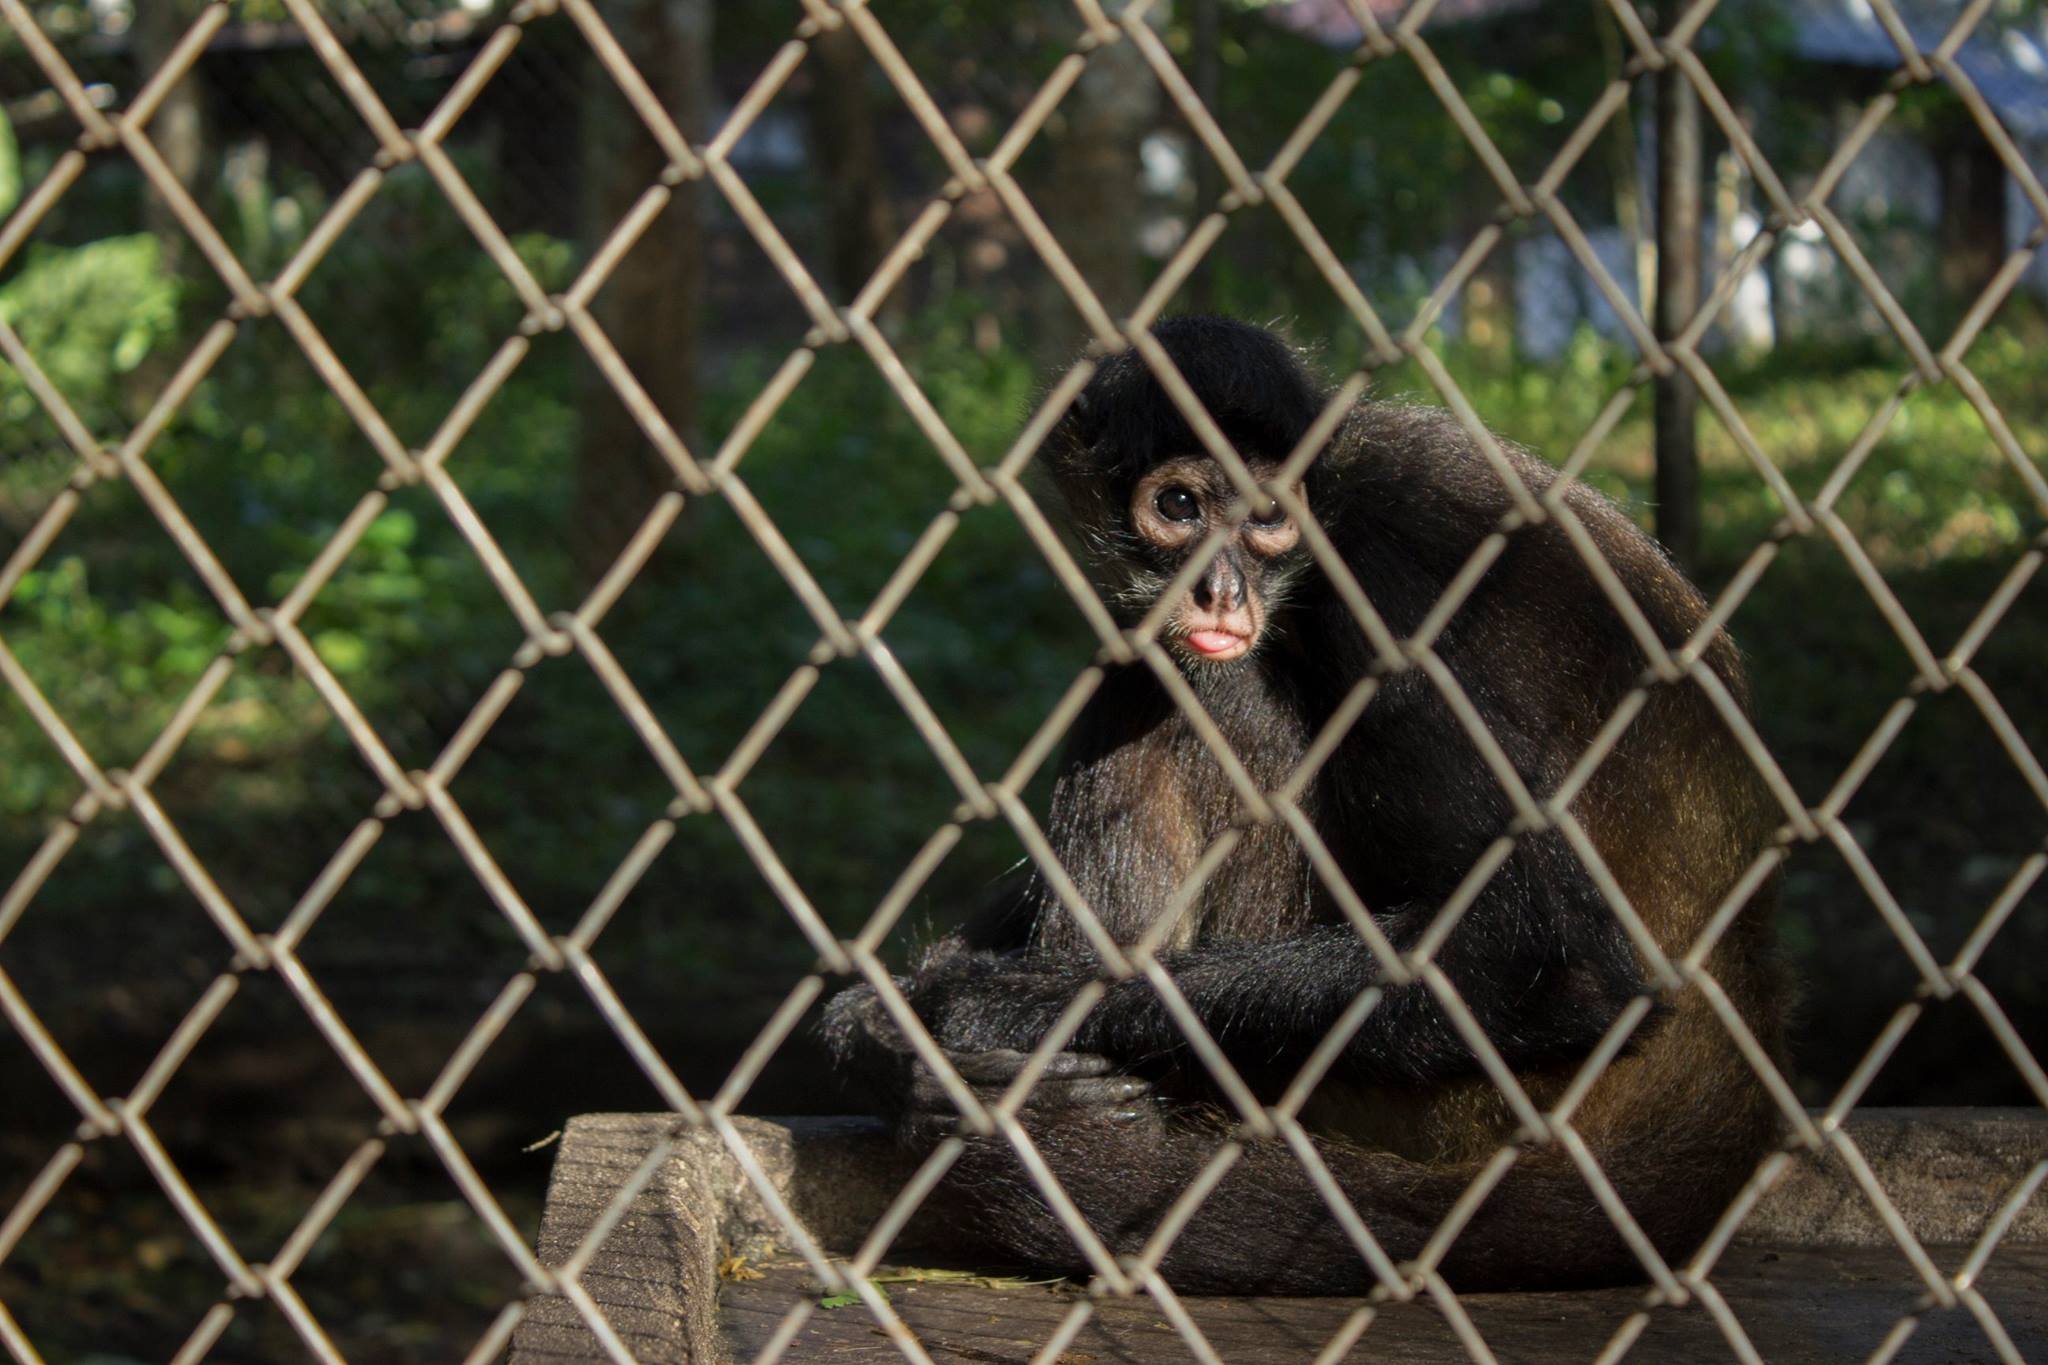  A spider monkey being rehabilitated at the center looks out from its enclosure. Many of the animals we received were found orphaned or injured, mostly due to human activities. 